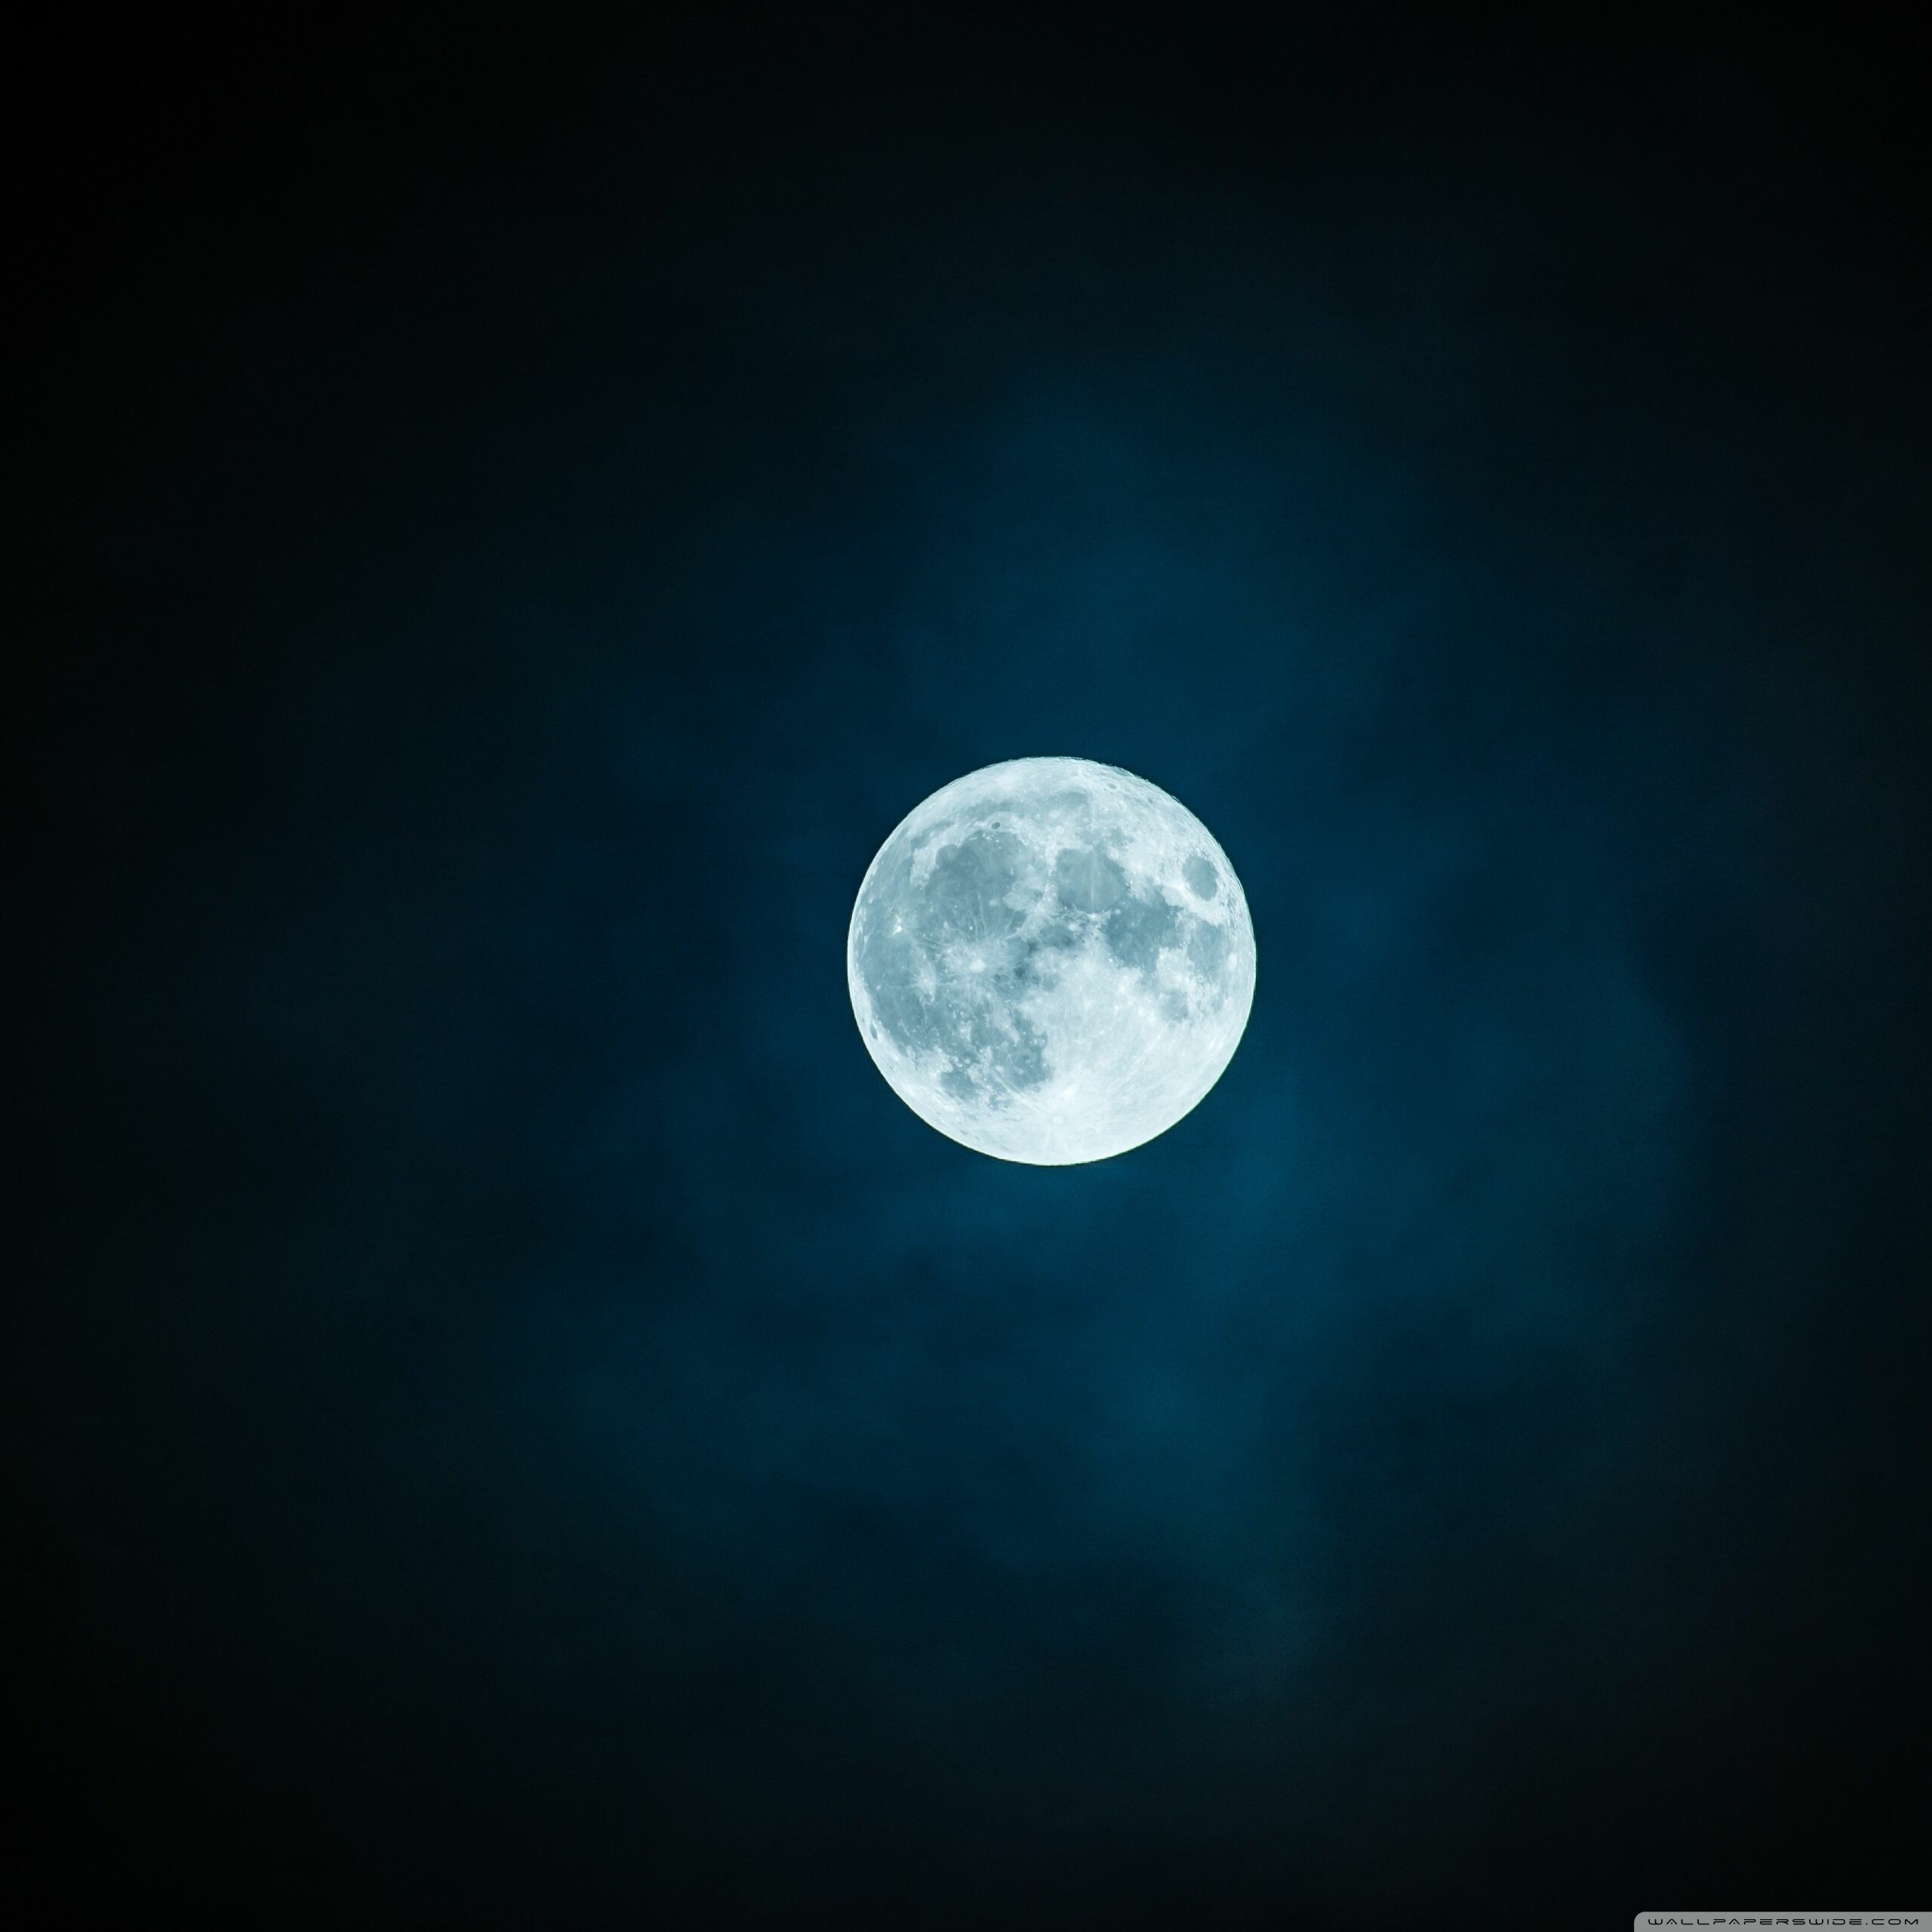 49+ Full Moon Wallpapers: HD, 4K, 5K for PC and Mobile | Download free  images for iPhone, Android